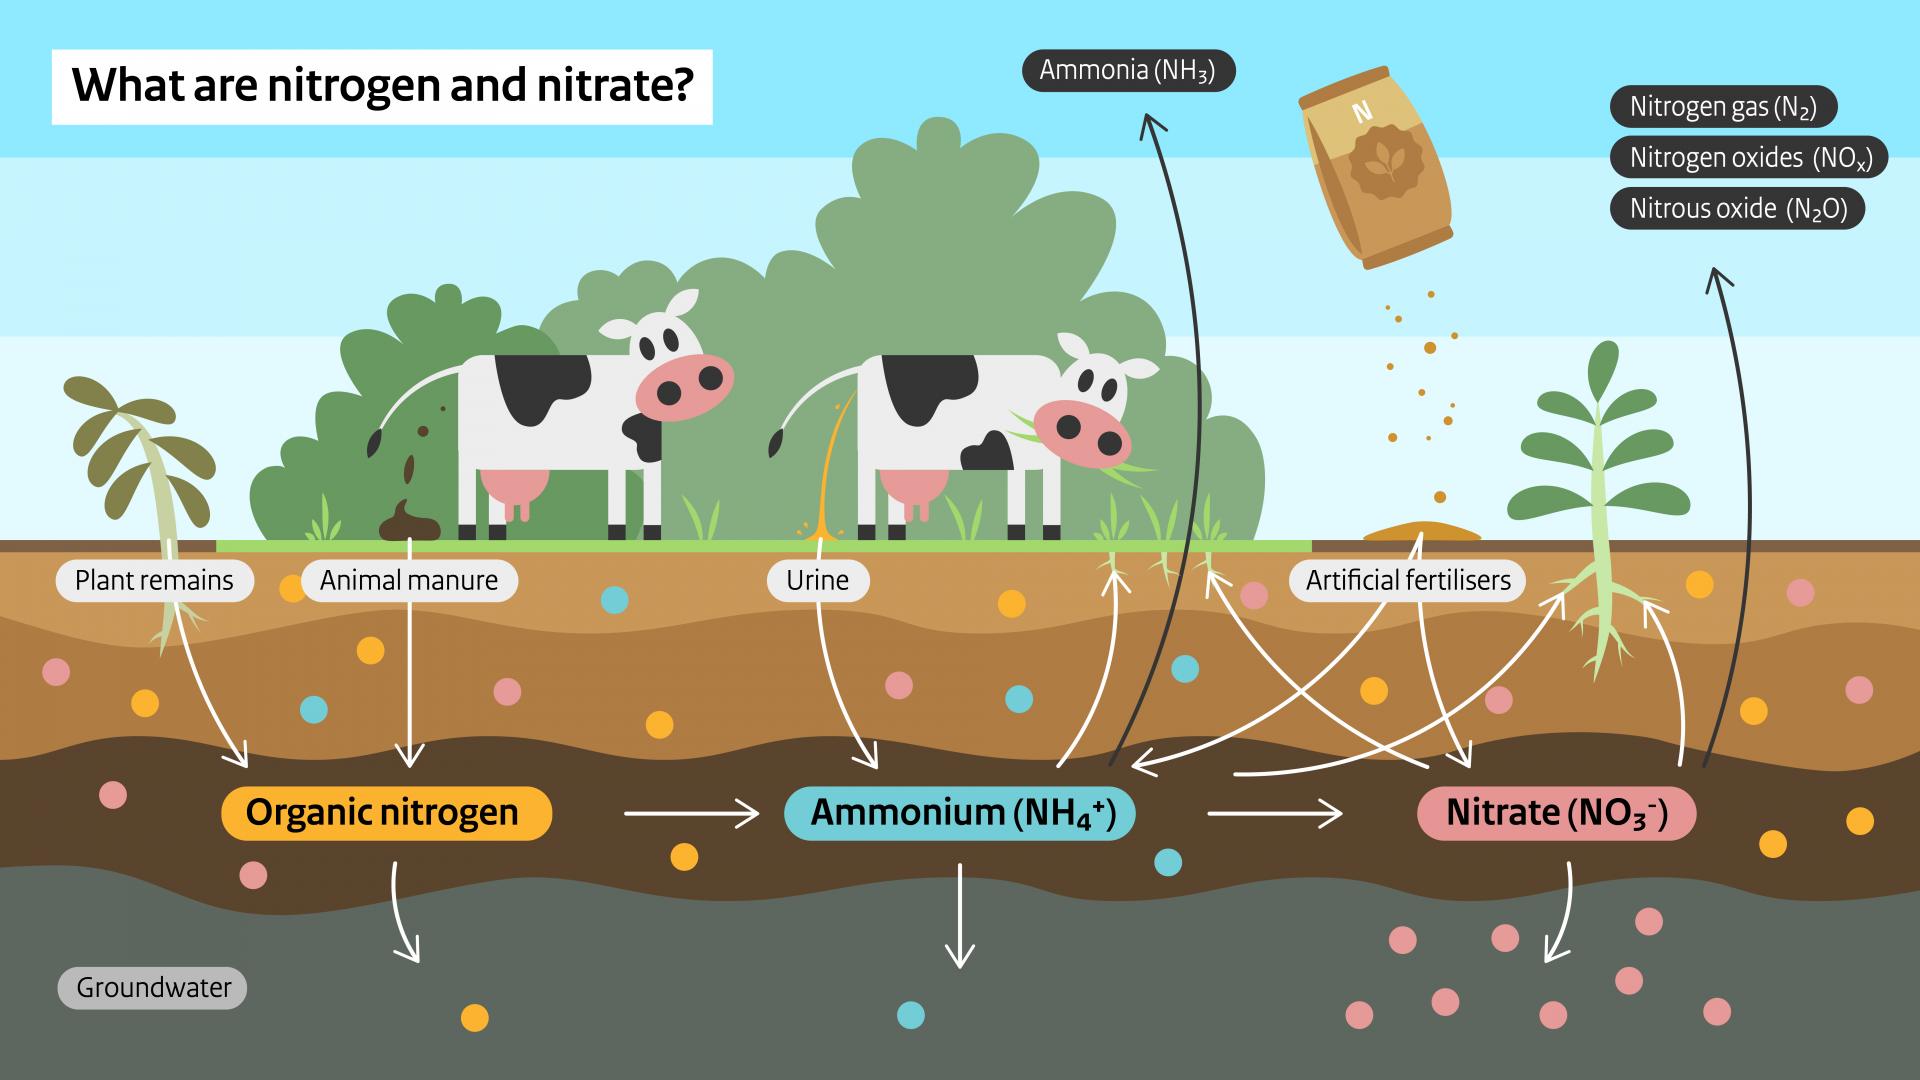 Explanation how nitrogen and nitrate arise from cattle